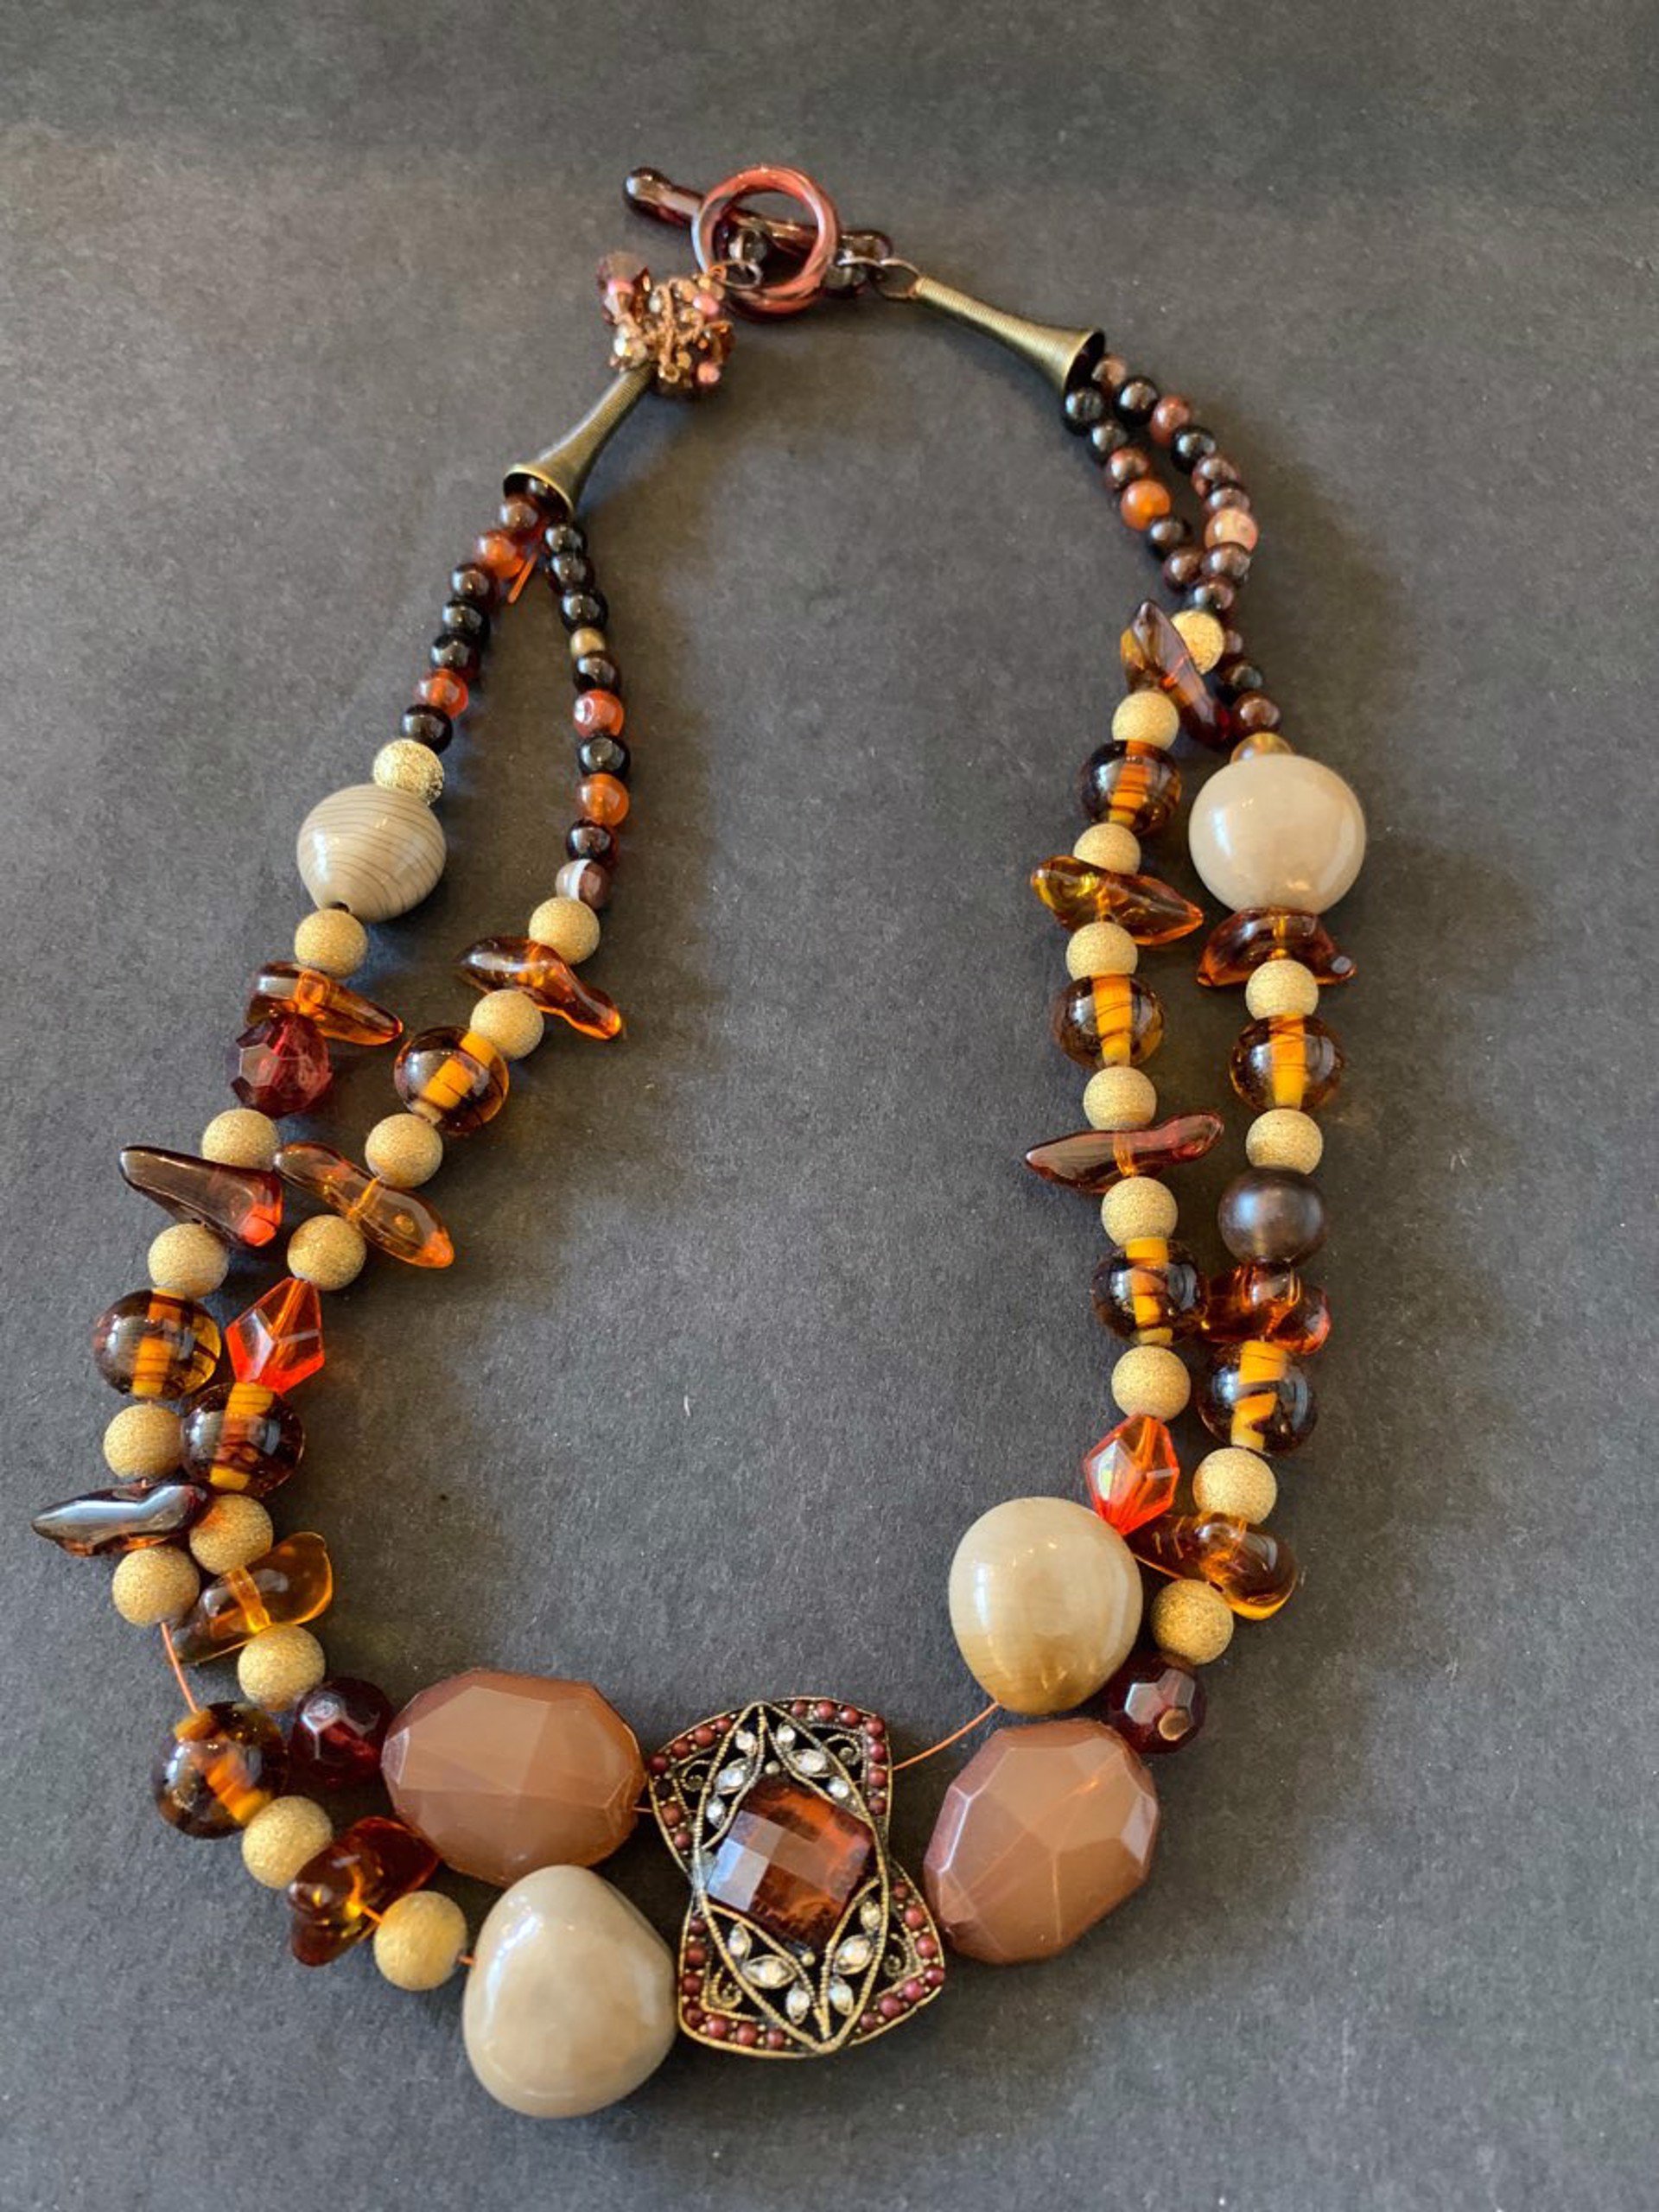 Russet and Amber Necklace by Patty Elzinga